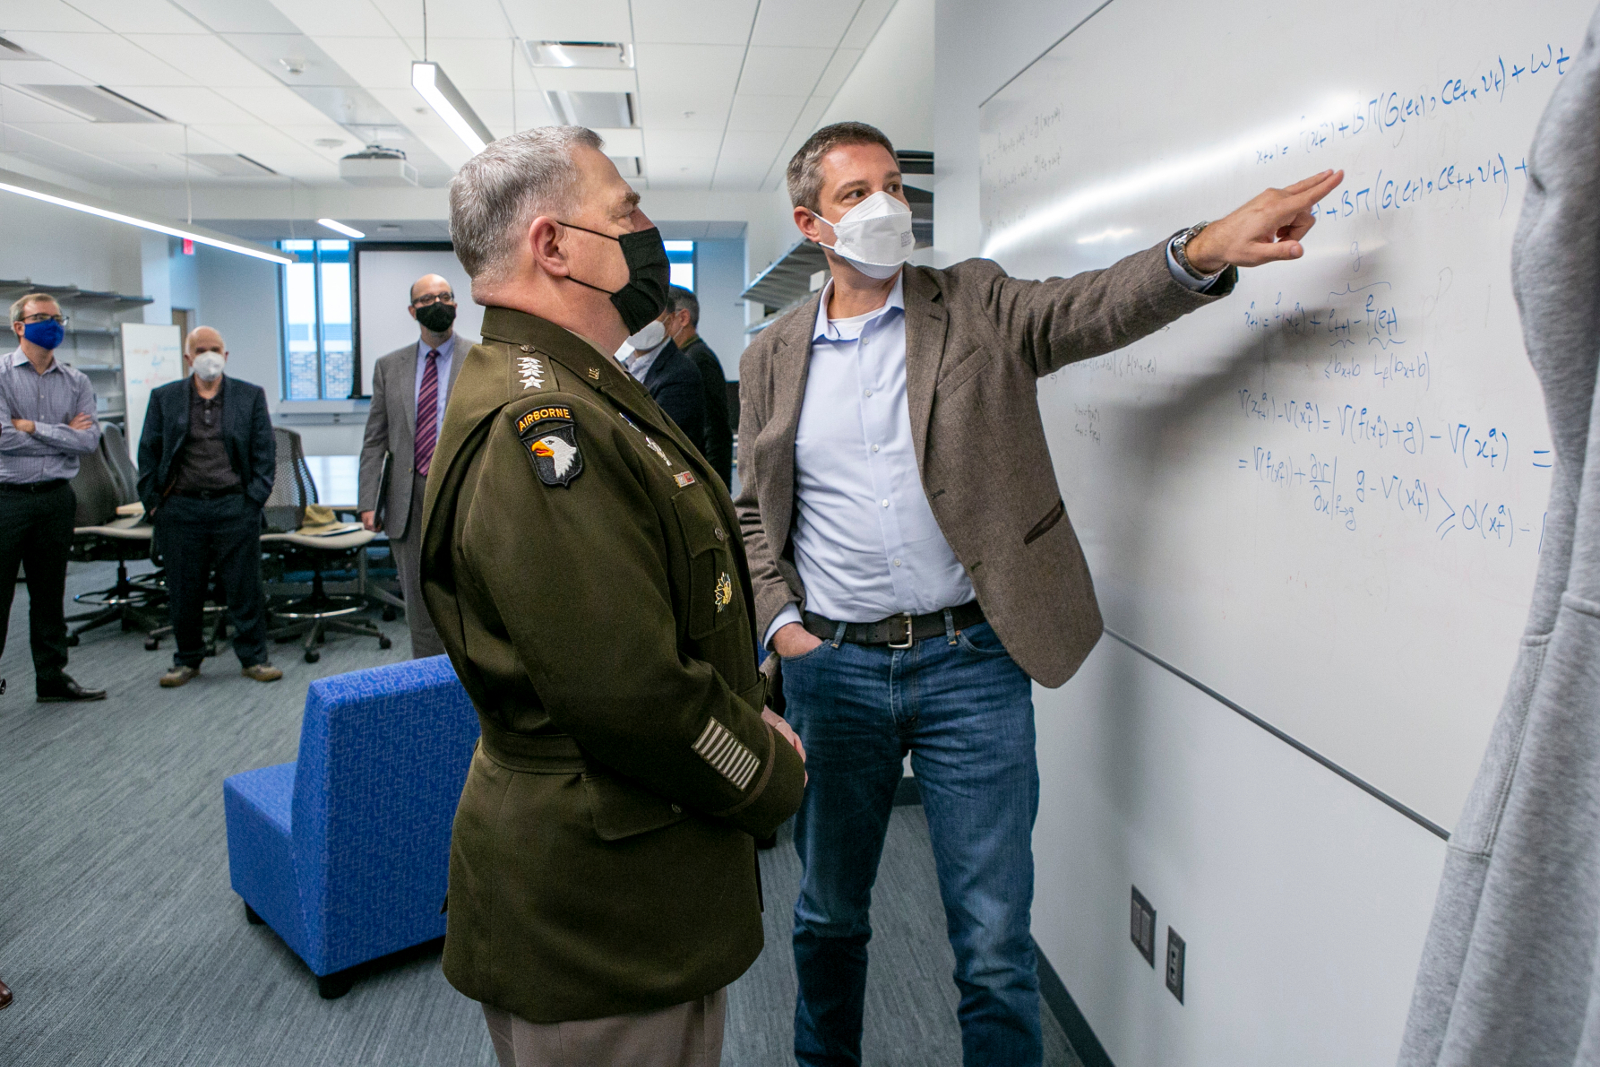 A general stands with a man at a white board who is pointing to equations written on it